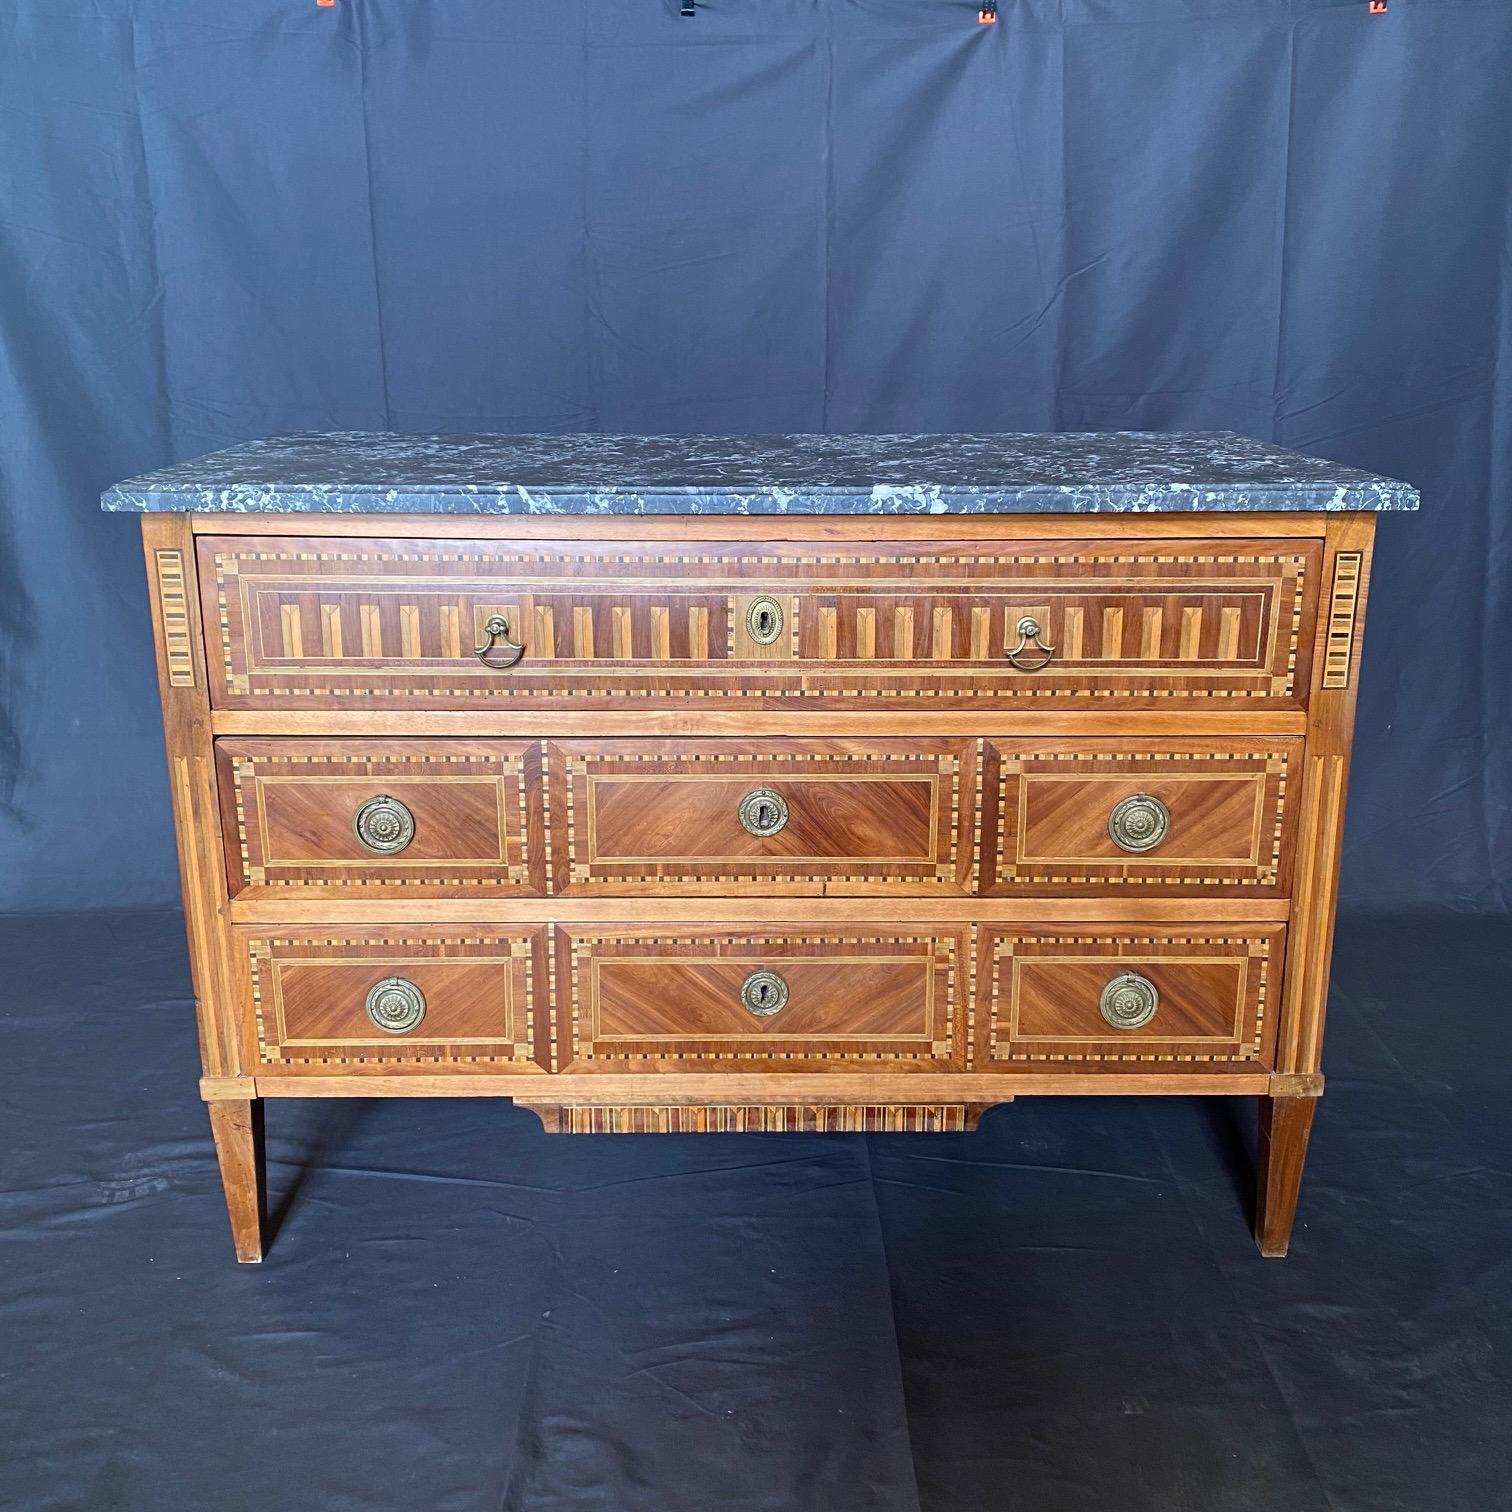 A fine late 18th Century French inlaid walnut commode, dresser or large chest of drawers, having high Louis XVI neoclassical form, three spacious drawers, separated by a moulding that runs around the front of the piece. Bronze wreathed pulls and